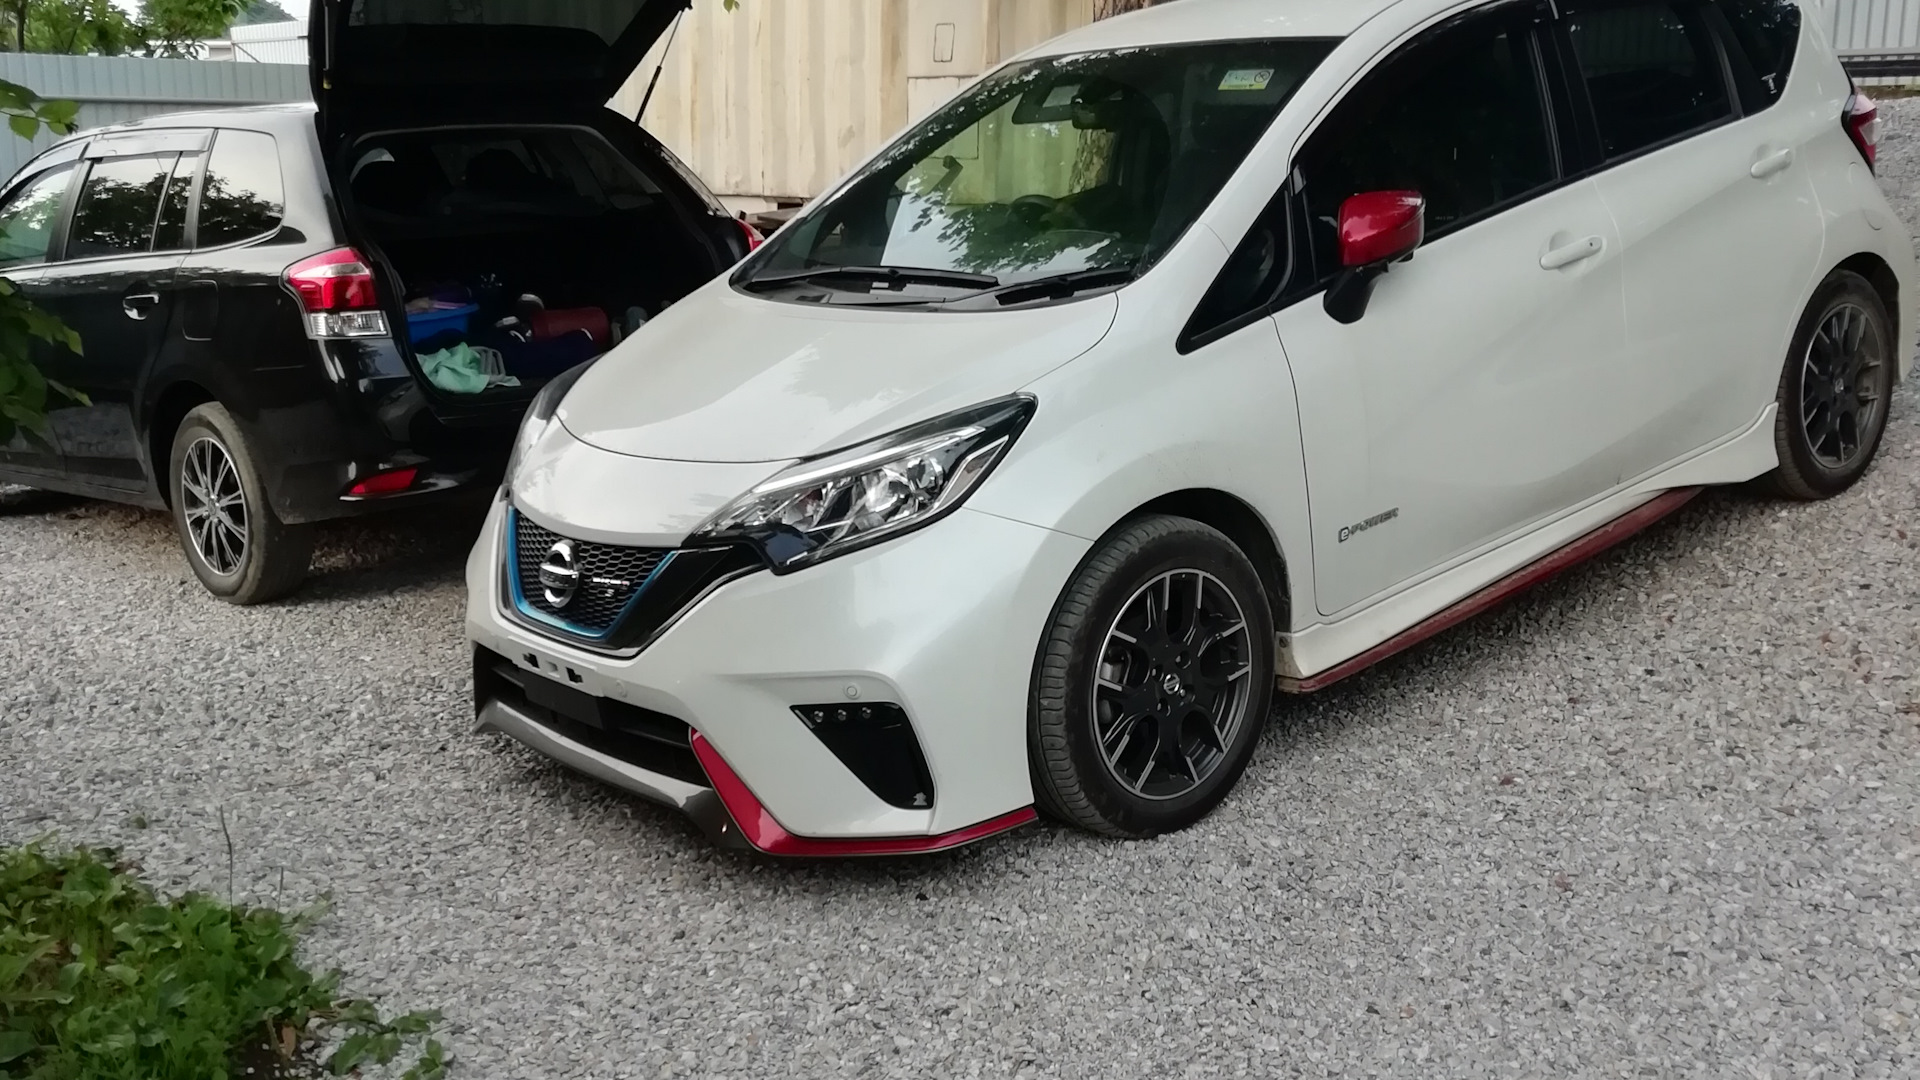 Nissan Note e-Power. Nissan Note 2019 гибрид. Note e Power Nismo. Note e-Power 2019.